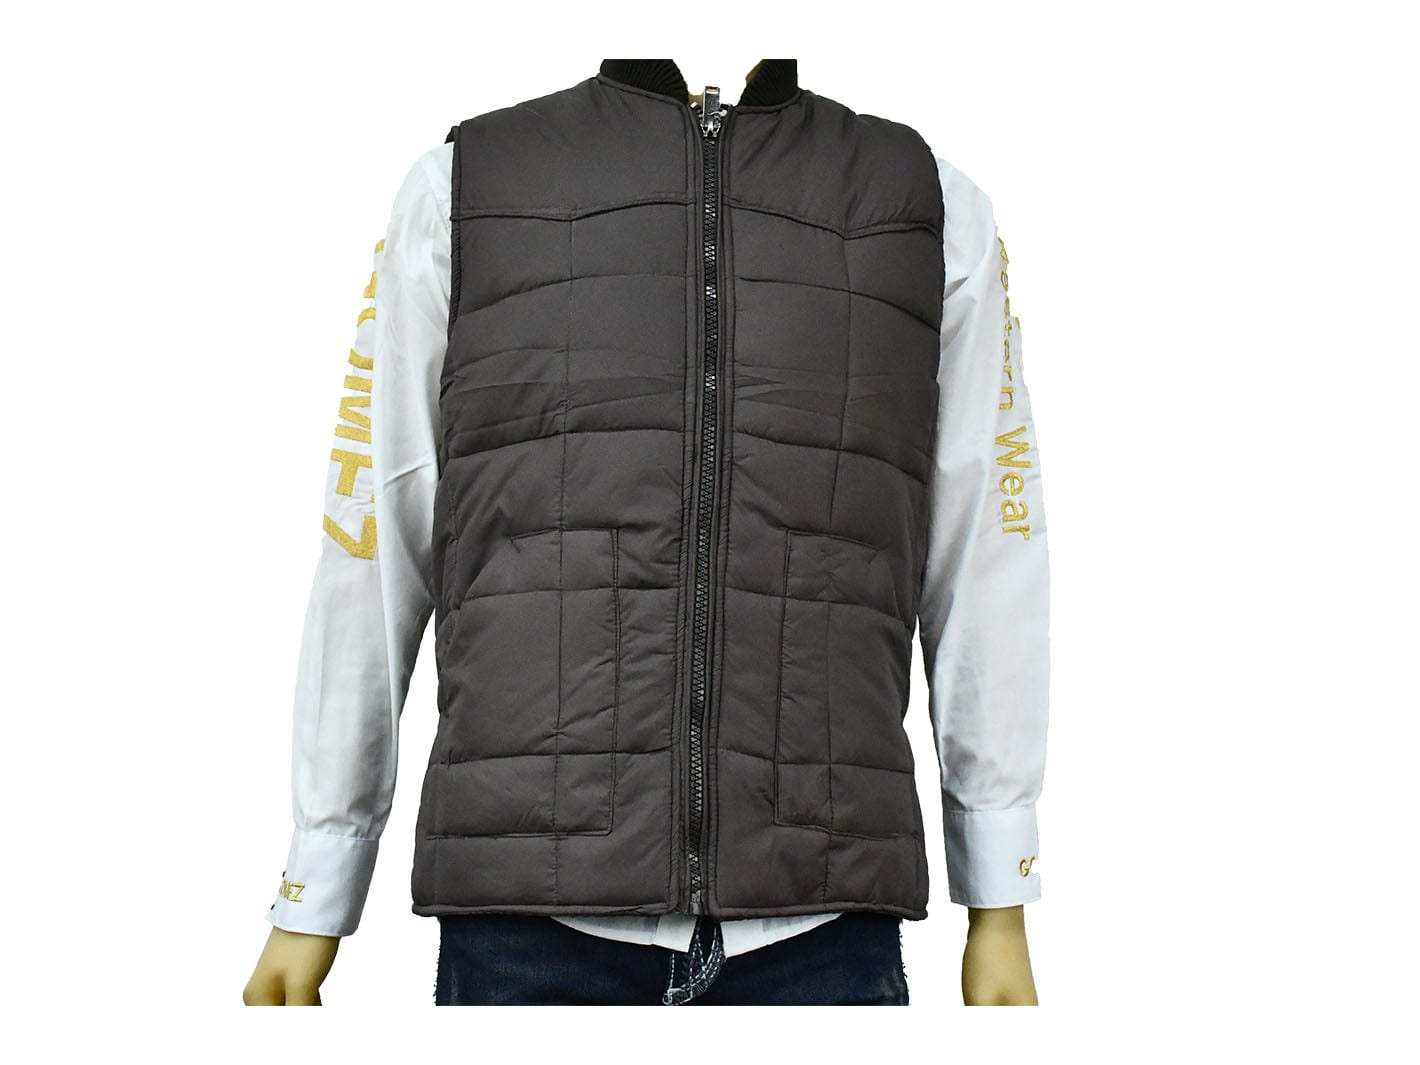 Texas Country Insulated Vest CLEARANCE